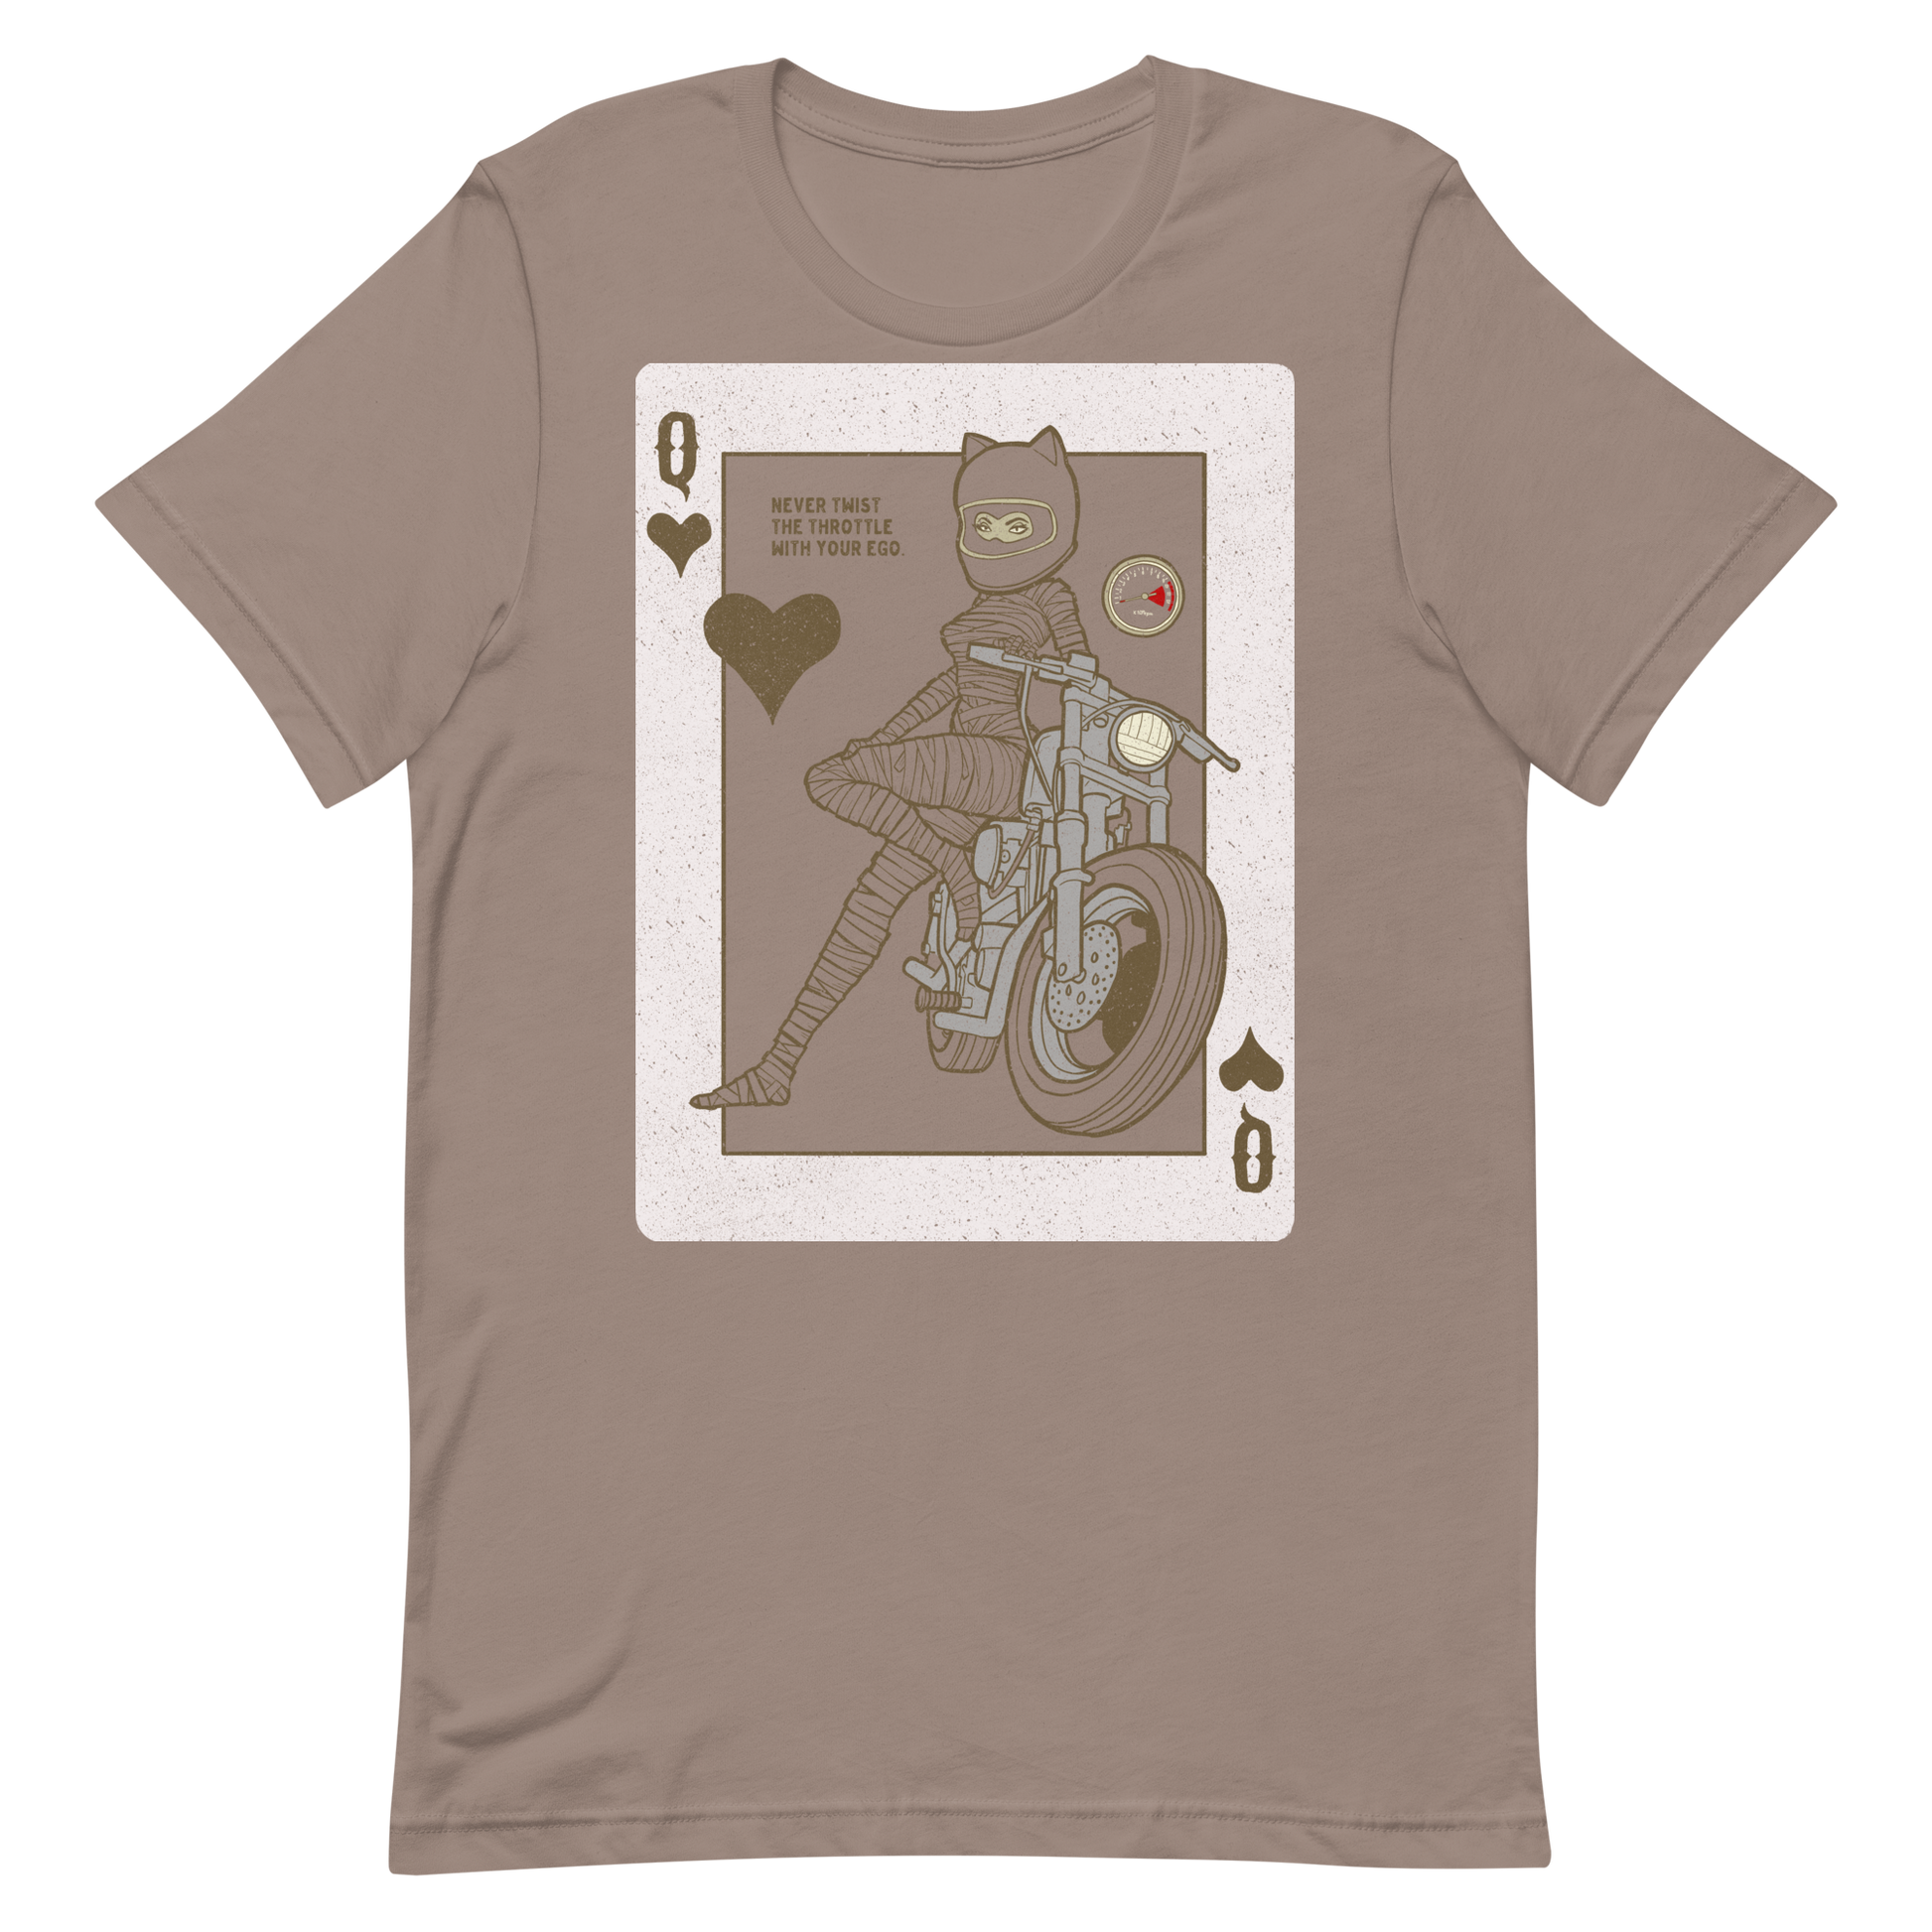 This Motorcycle Queen Playing Card t-shirt is everything you've dreamed of and more. It feels soft and lightweight, with the right amount of stretch. It's comfortable and flattering for all.